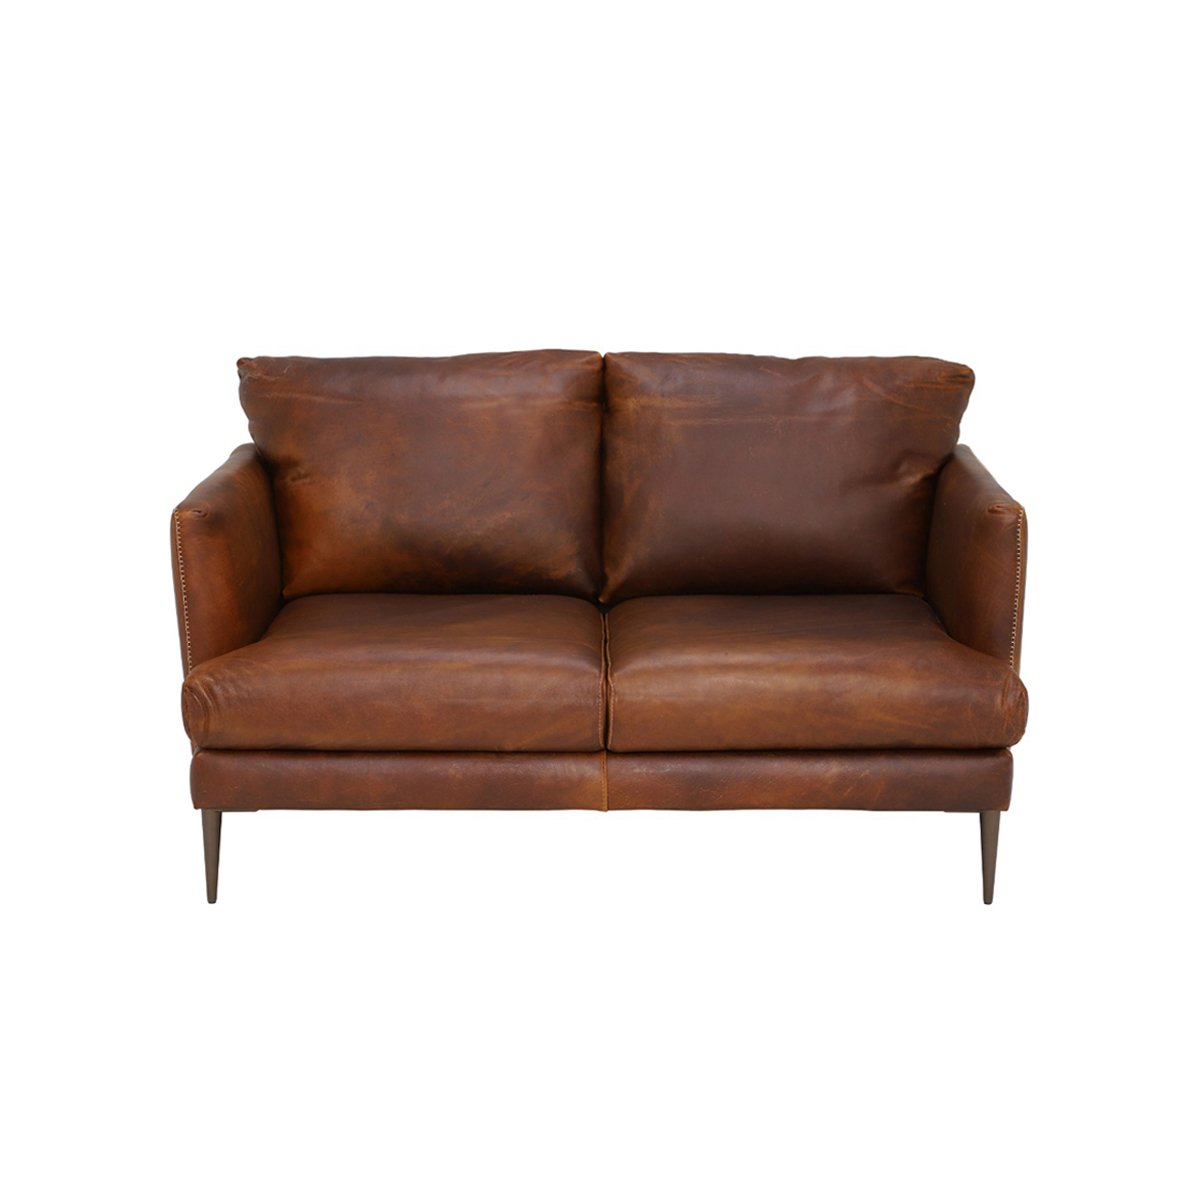 Acacia Loveseat Sofa, Brown Leather | Barker & Stonehouse